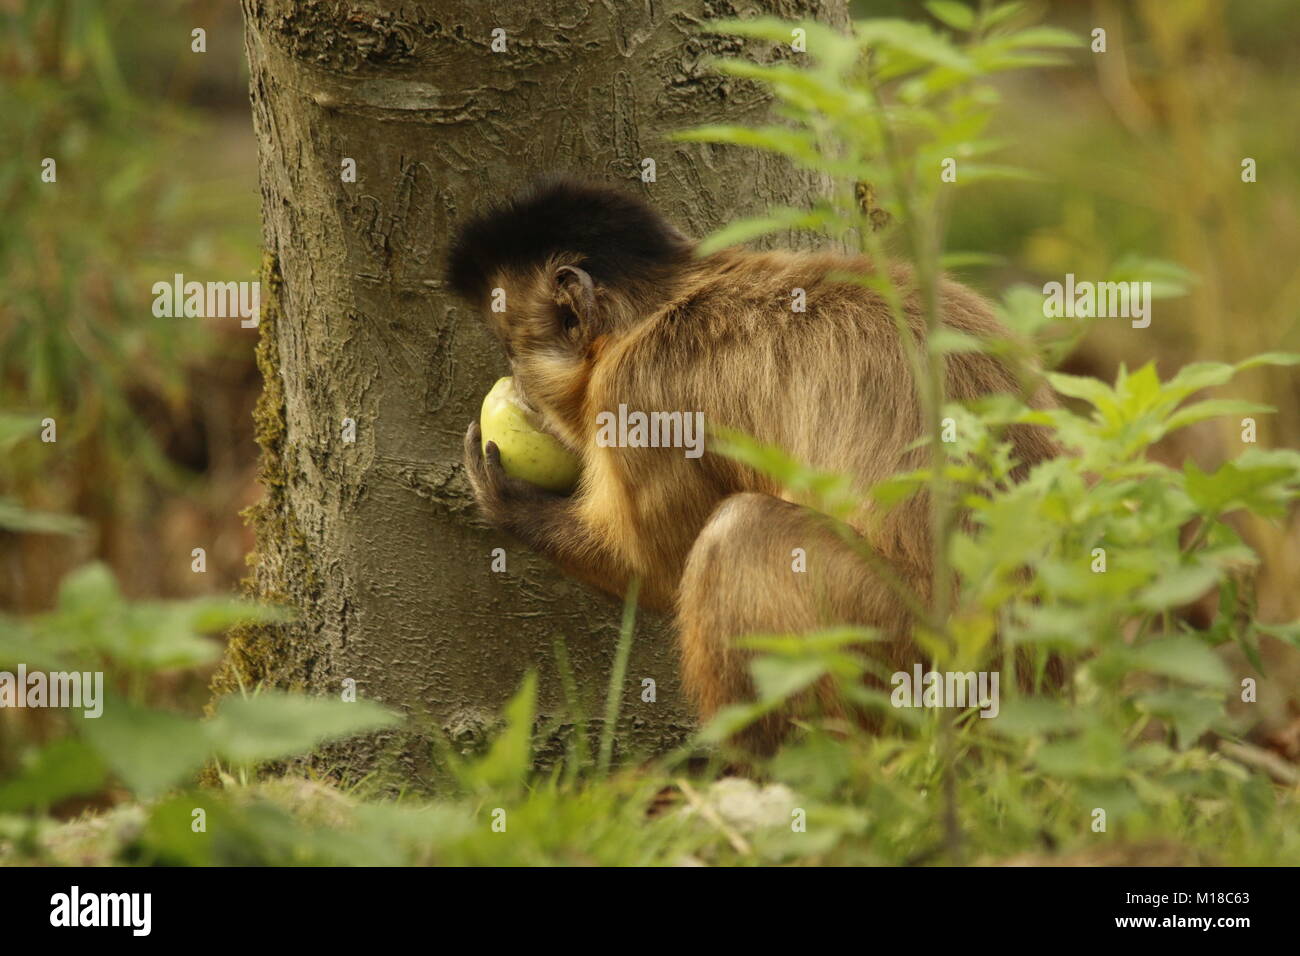 Gracile capuchin monkey in a park Stock Photo